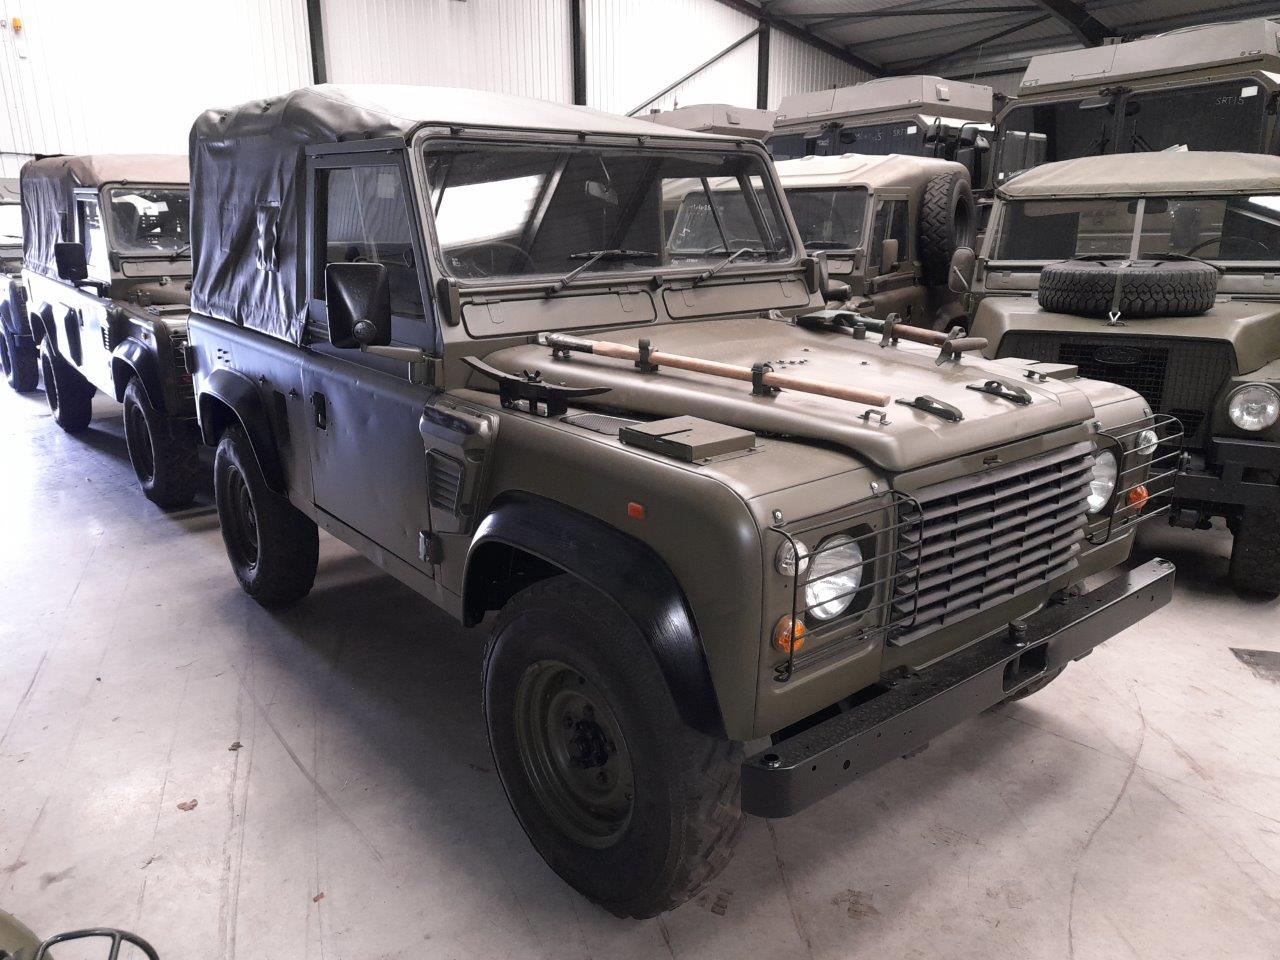 Land Rover Defender 90 Wolf  RHD Soft Top (Remus) - Govsales of ex military vehicles for sale, mod surplus